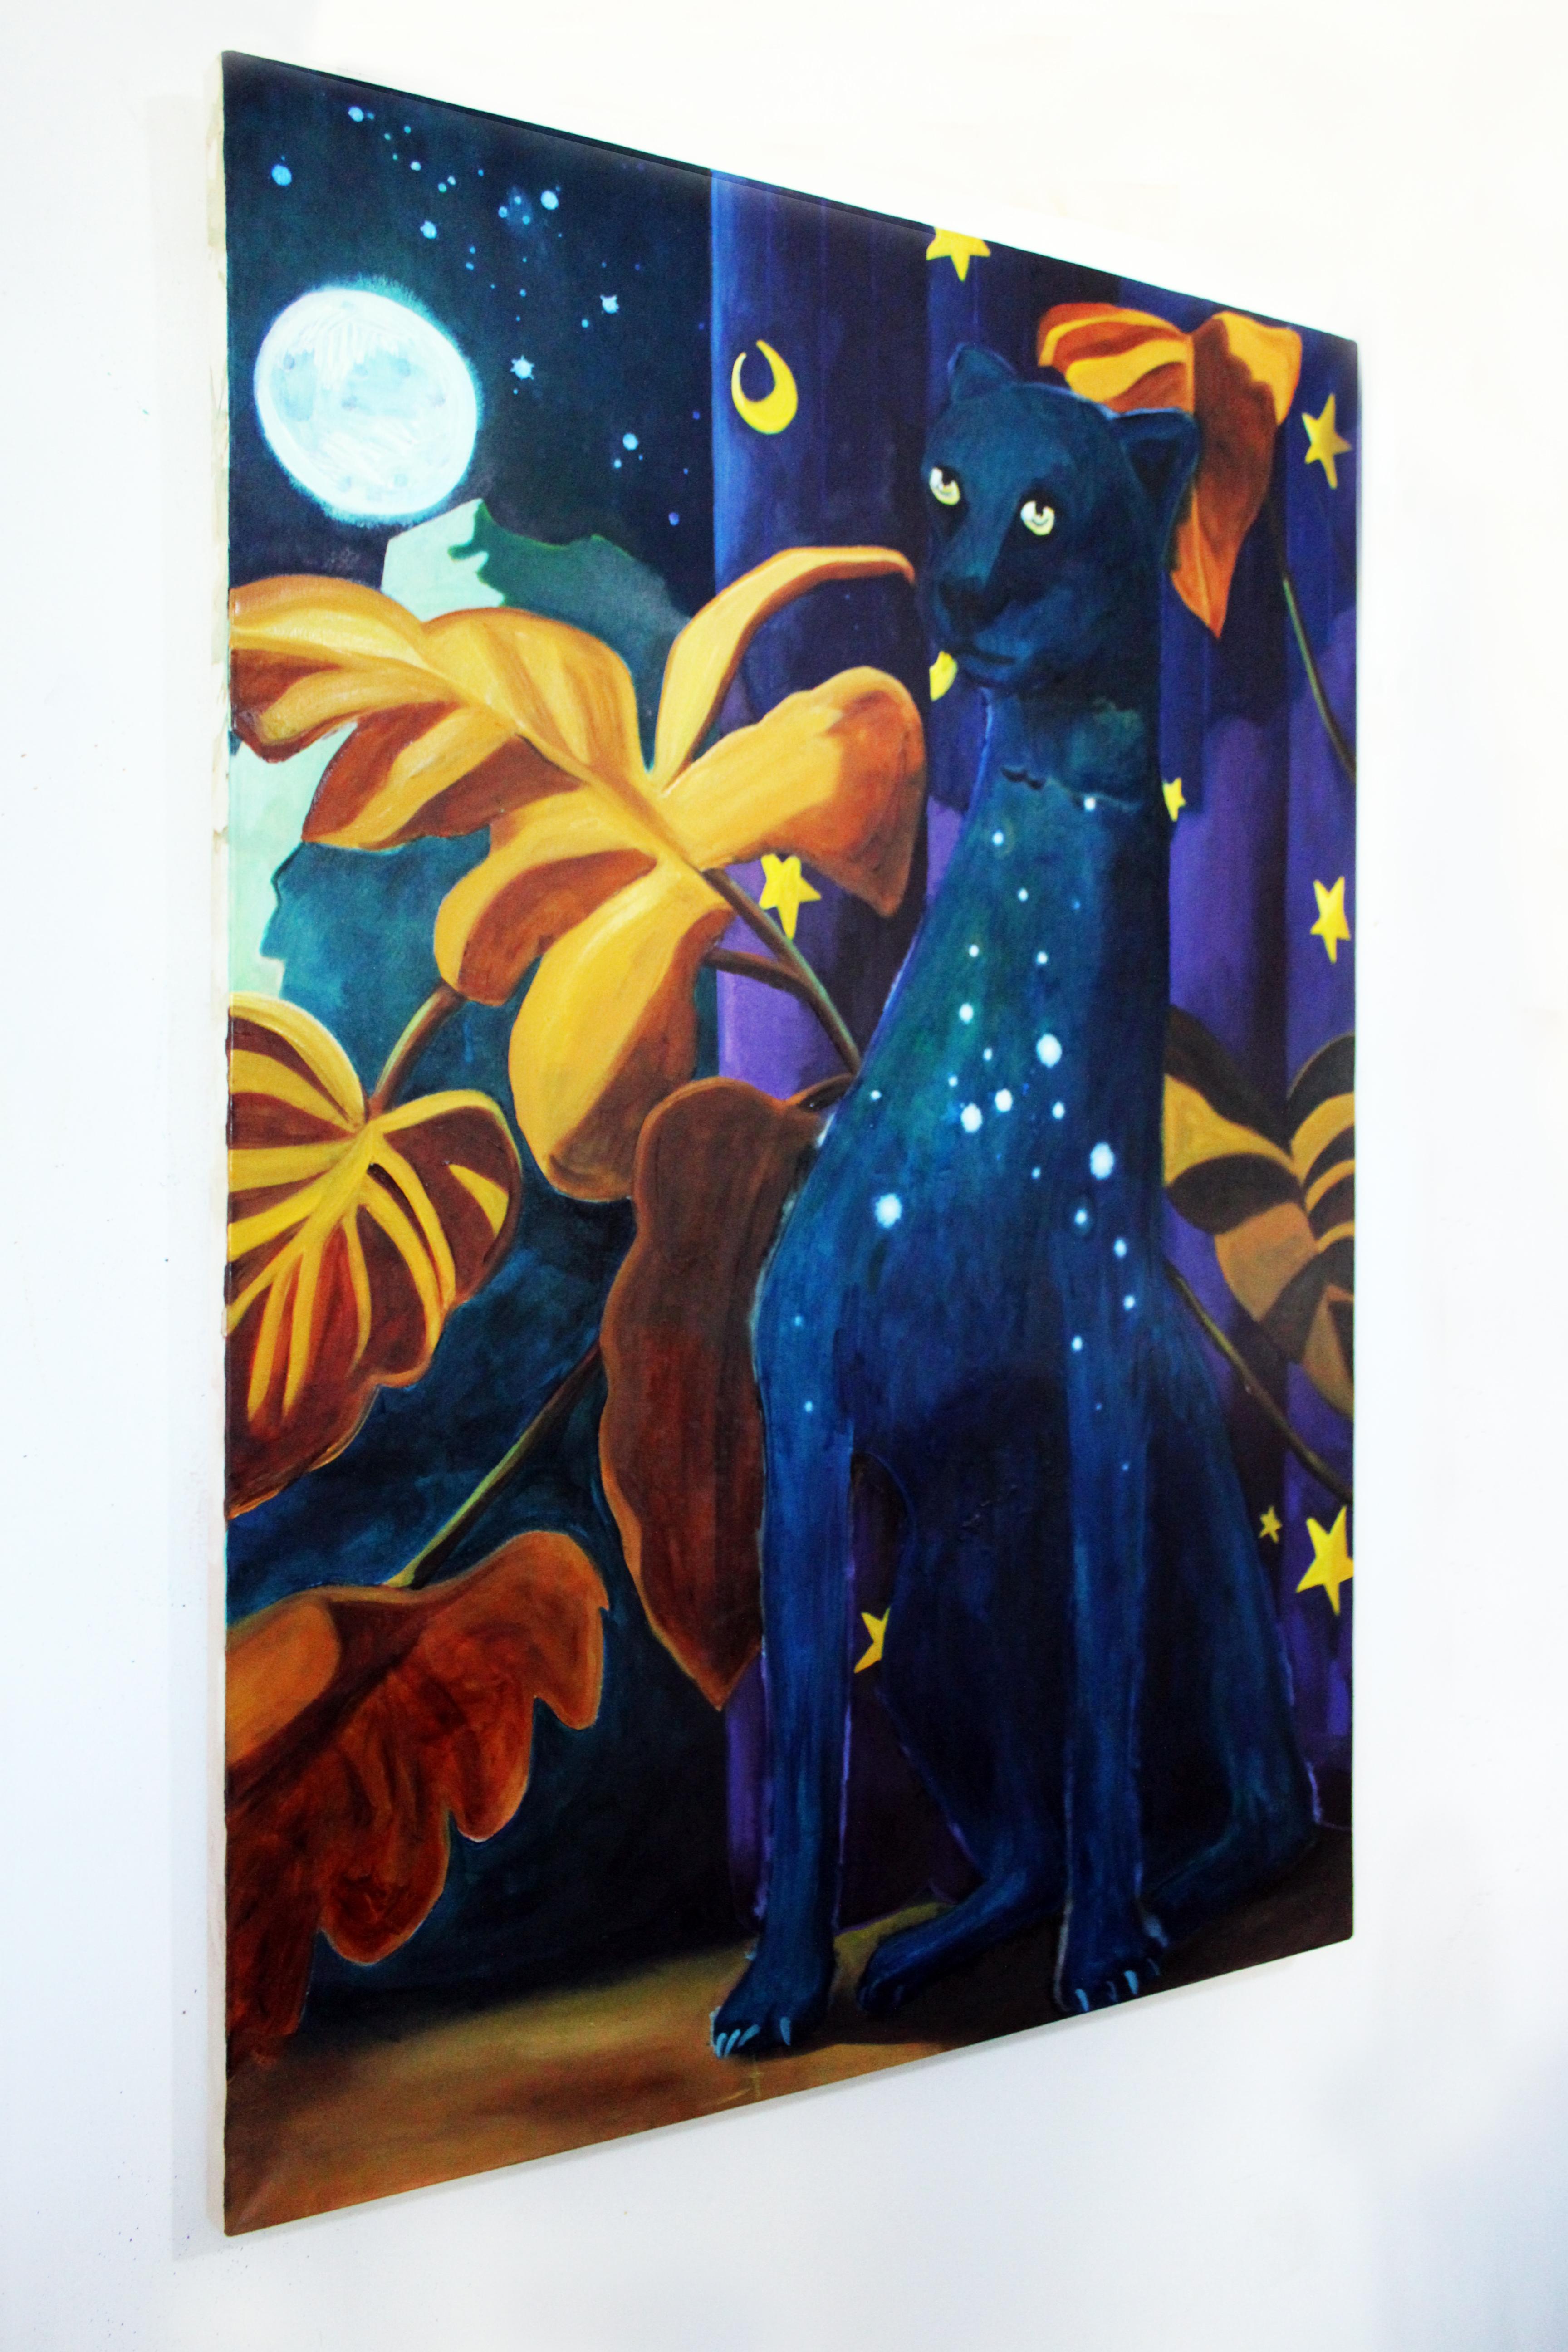 Midnight Guardian - Painting by Ben Stephenson